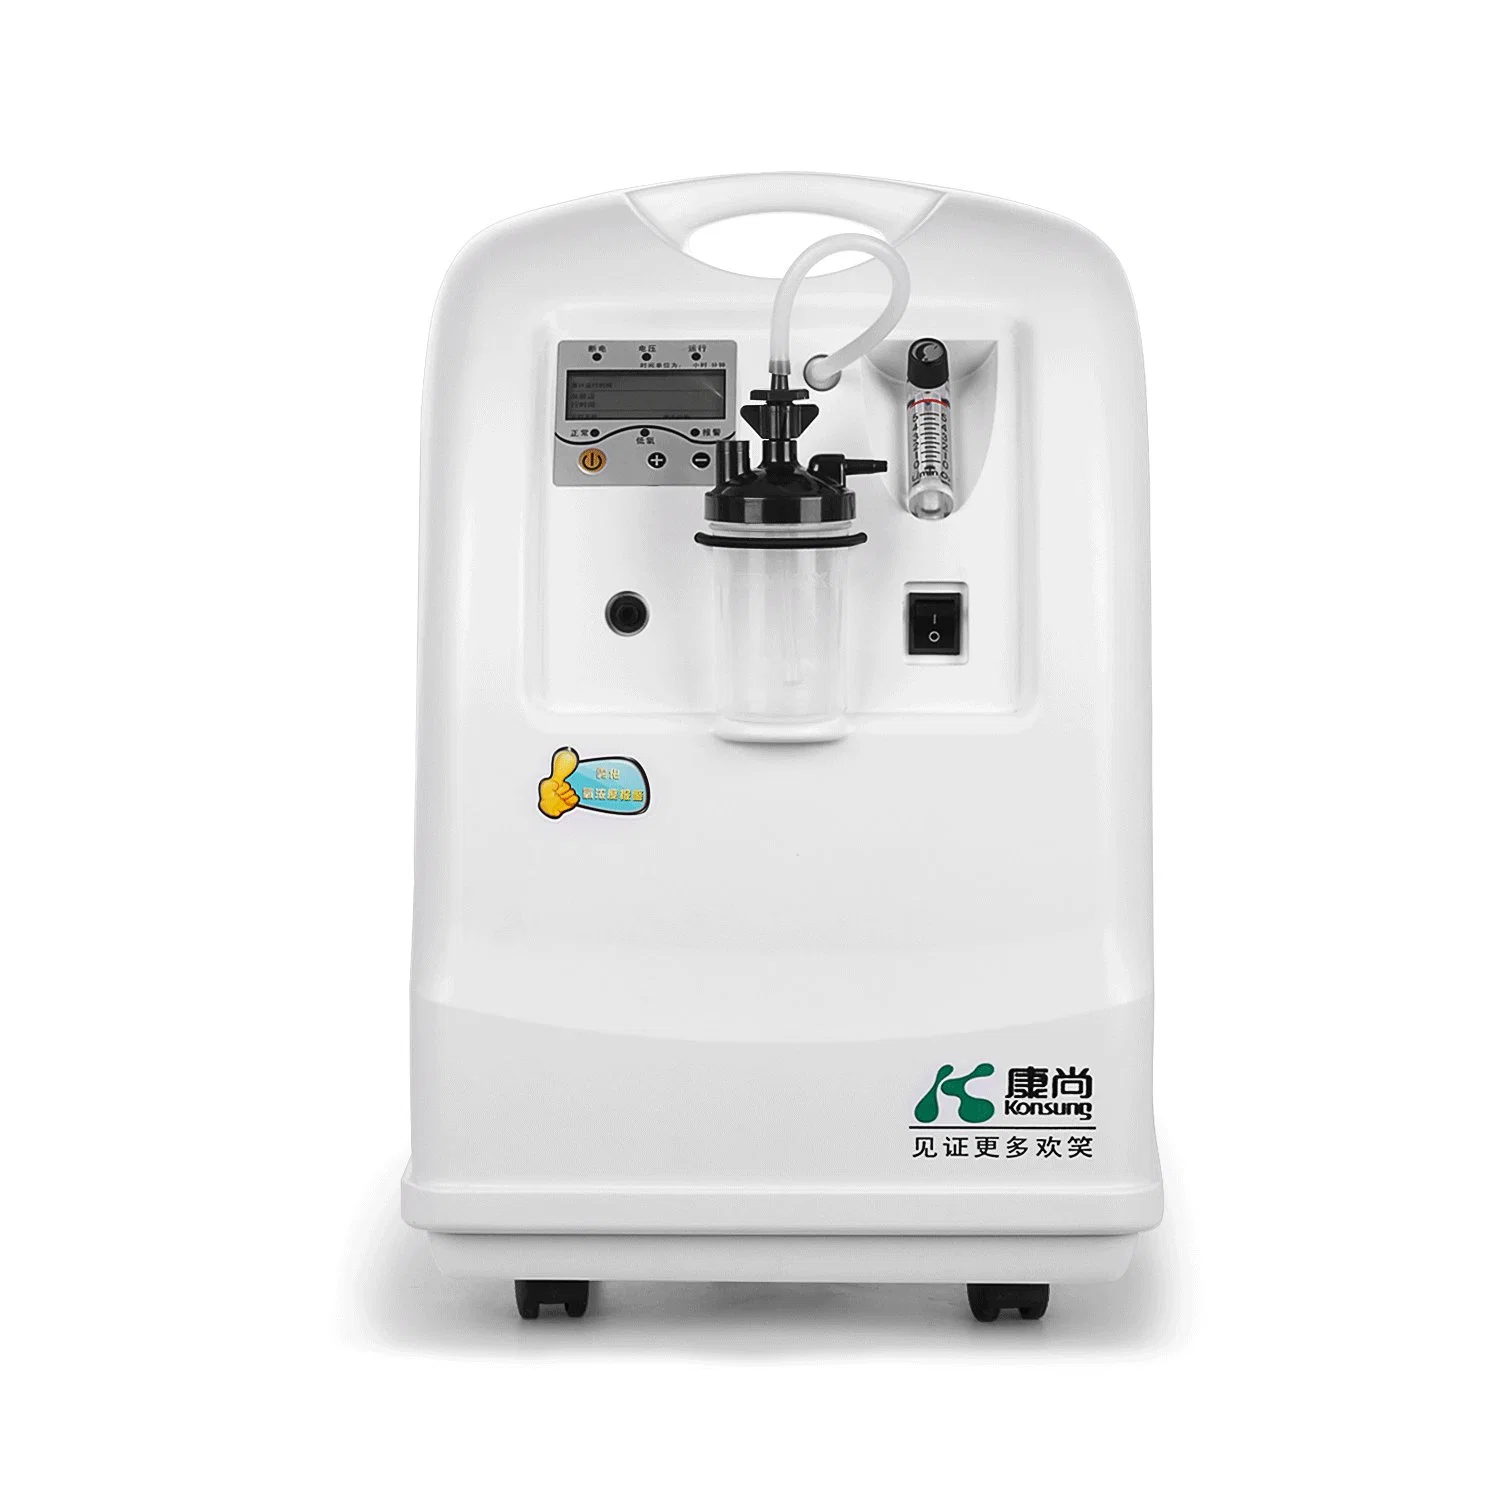 Ksoc-8 Hot Selling Health High-Flow 8 Liter Oxygen Concentrator with Overload Protection